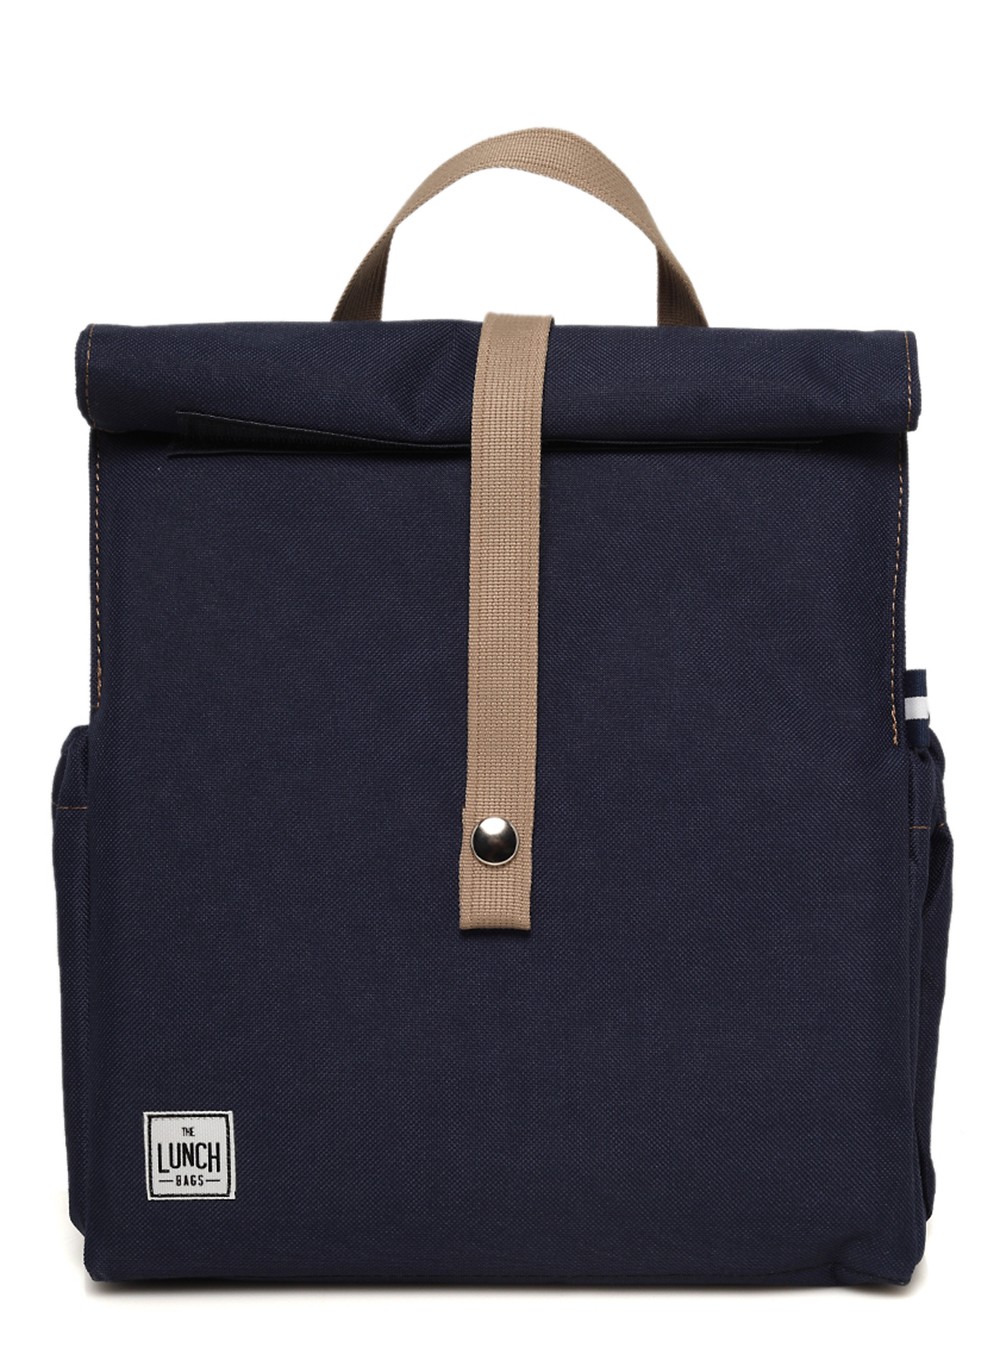 Plecak The Lunch Bags Lunchpack - blue